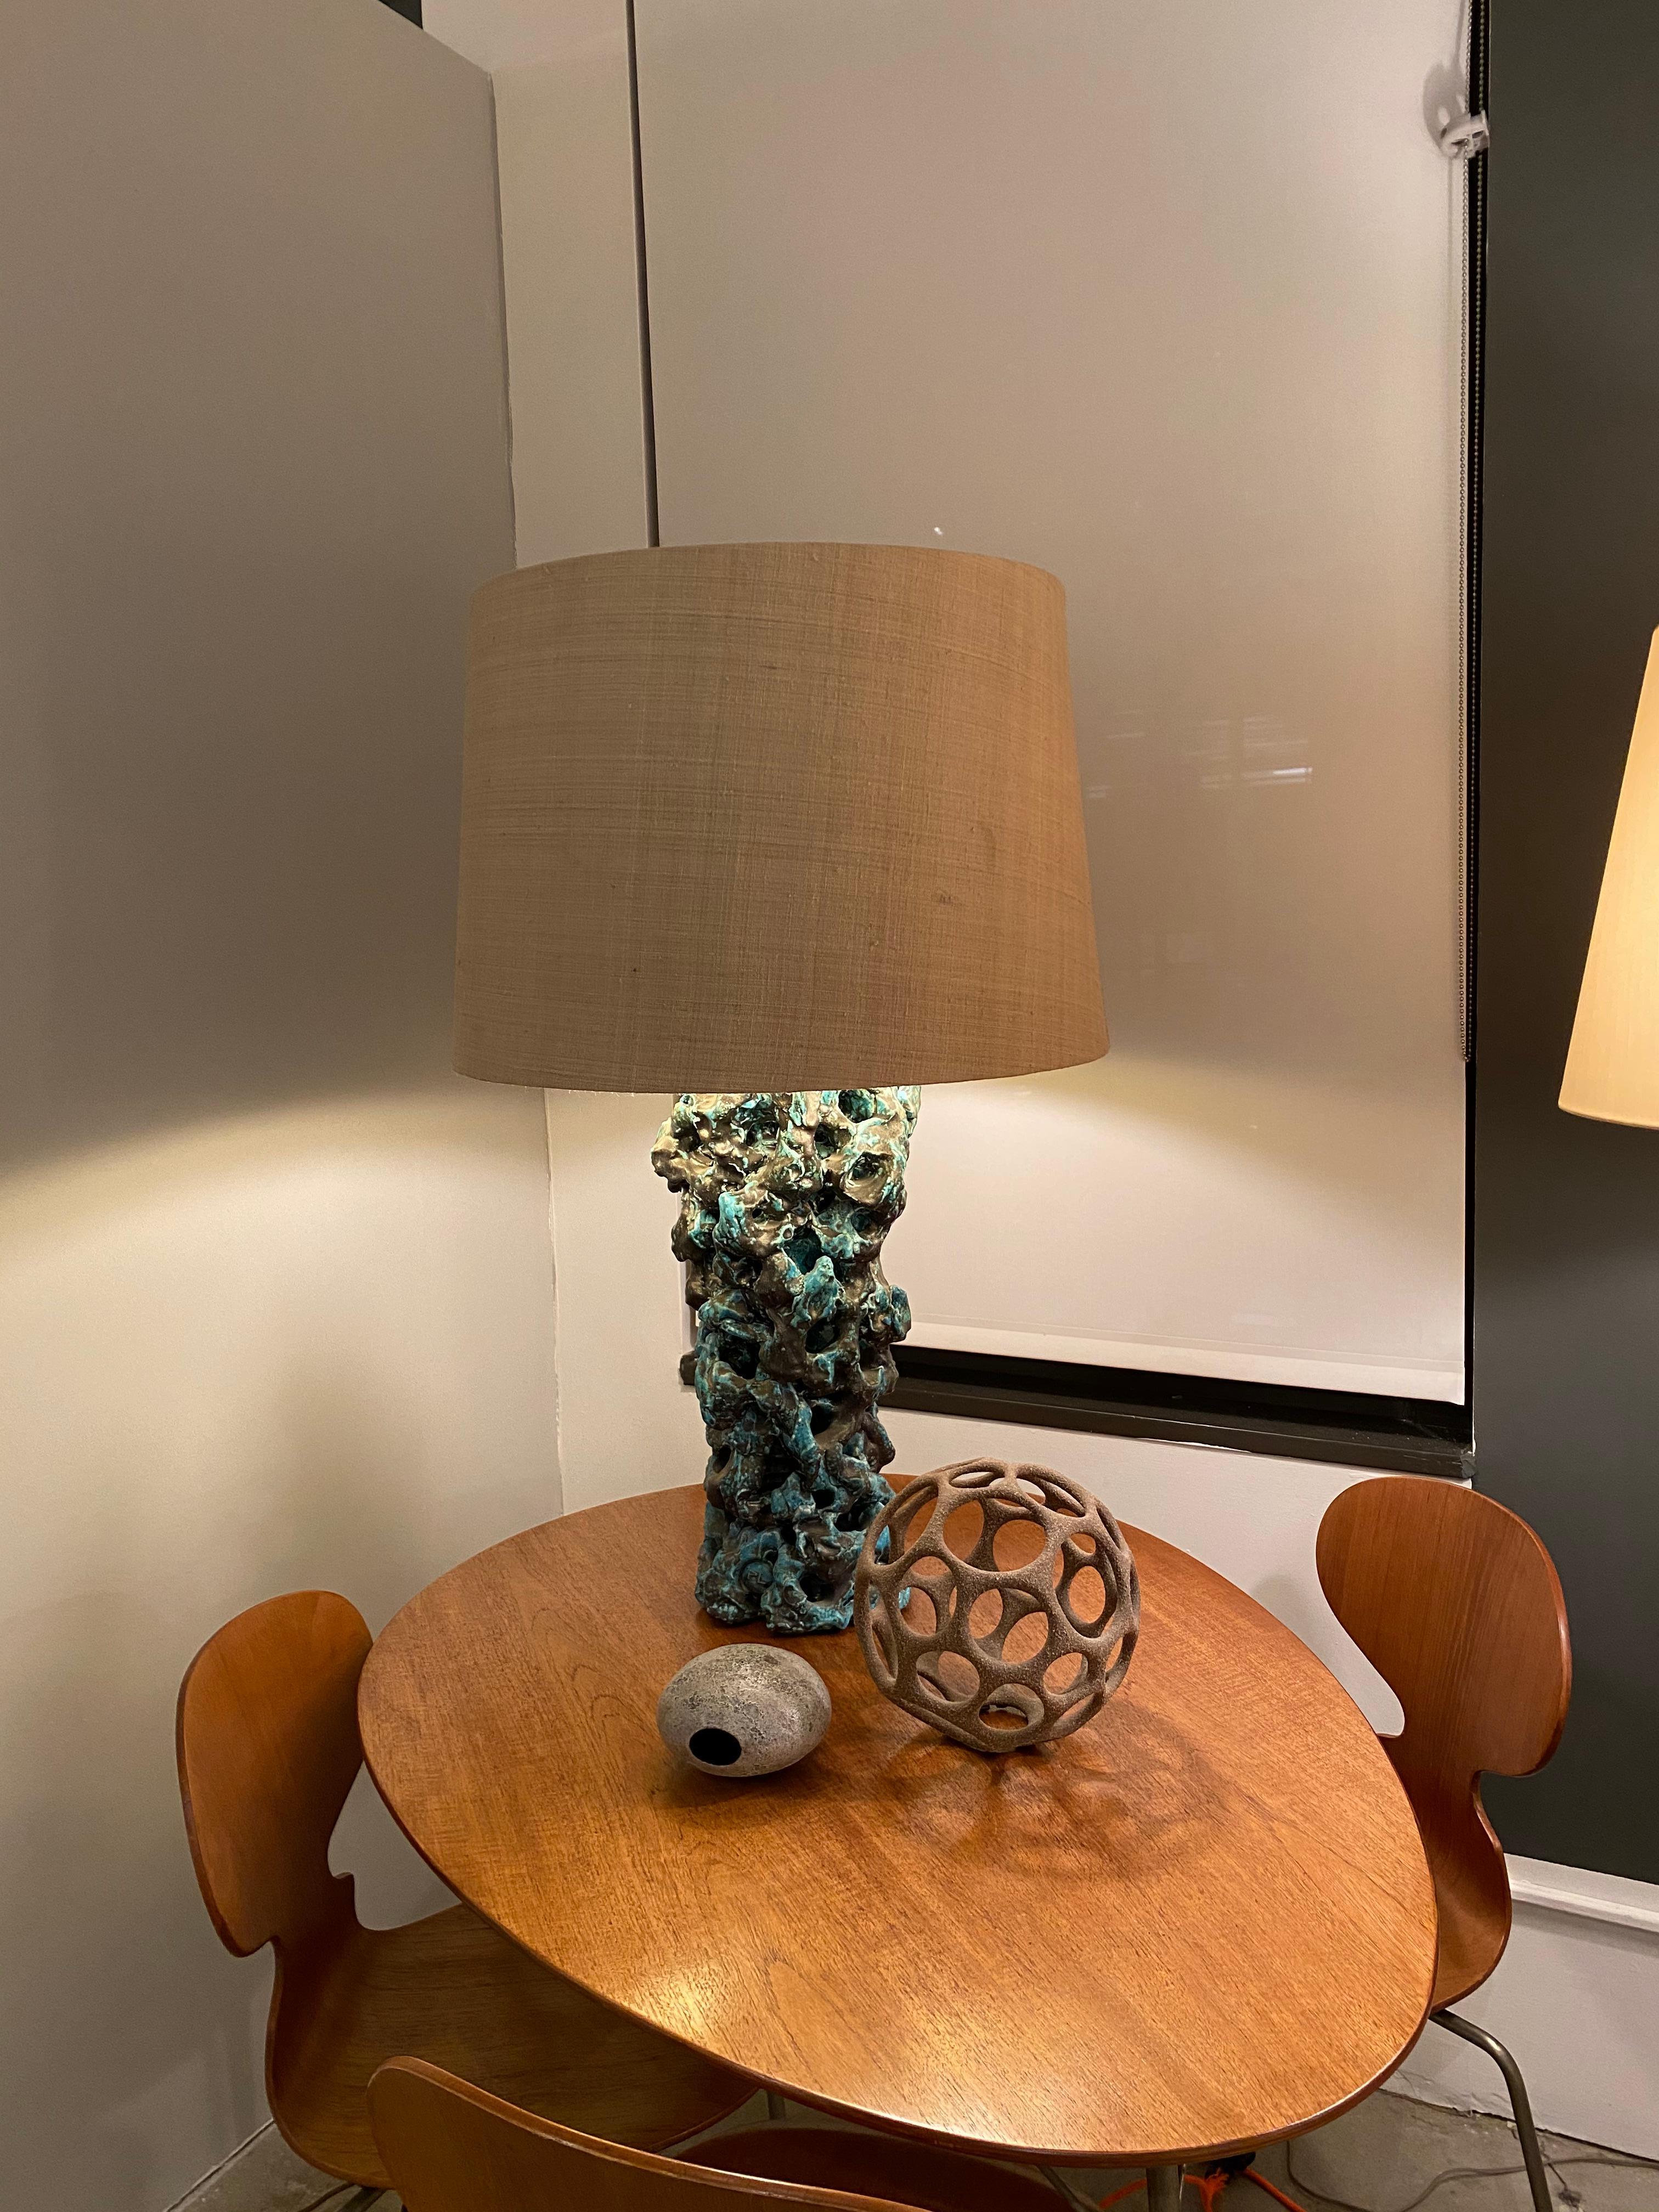 Scholar's Rock Glazed Ceramic Table Lamp In Excellent Condition For Sale In New York, NY